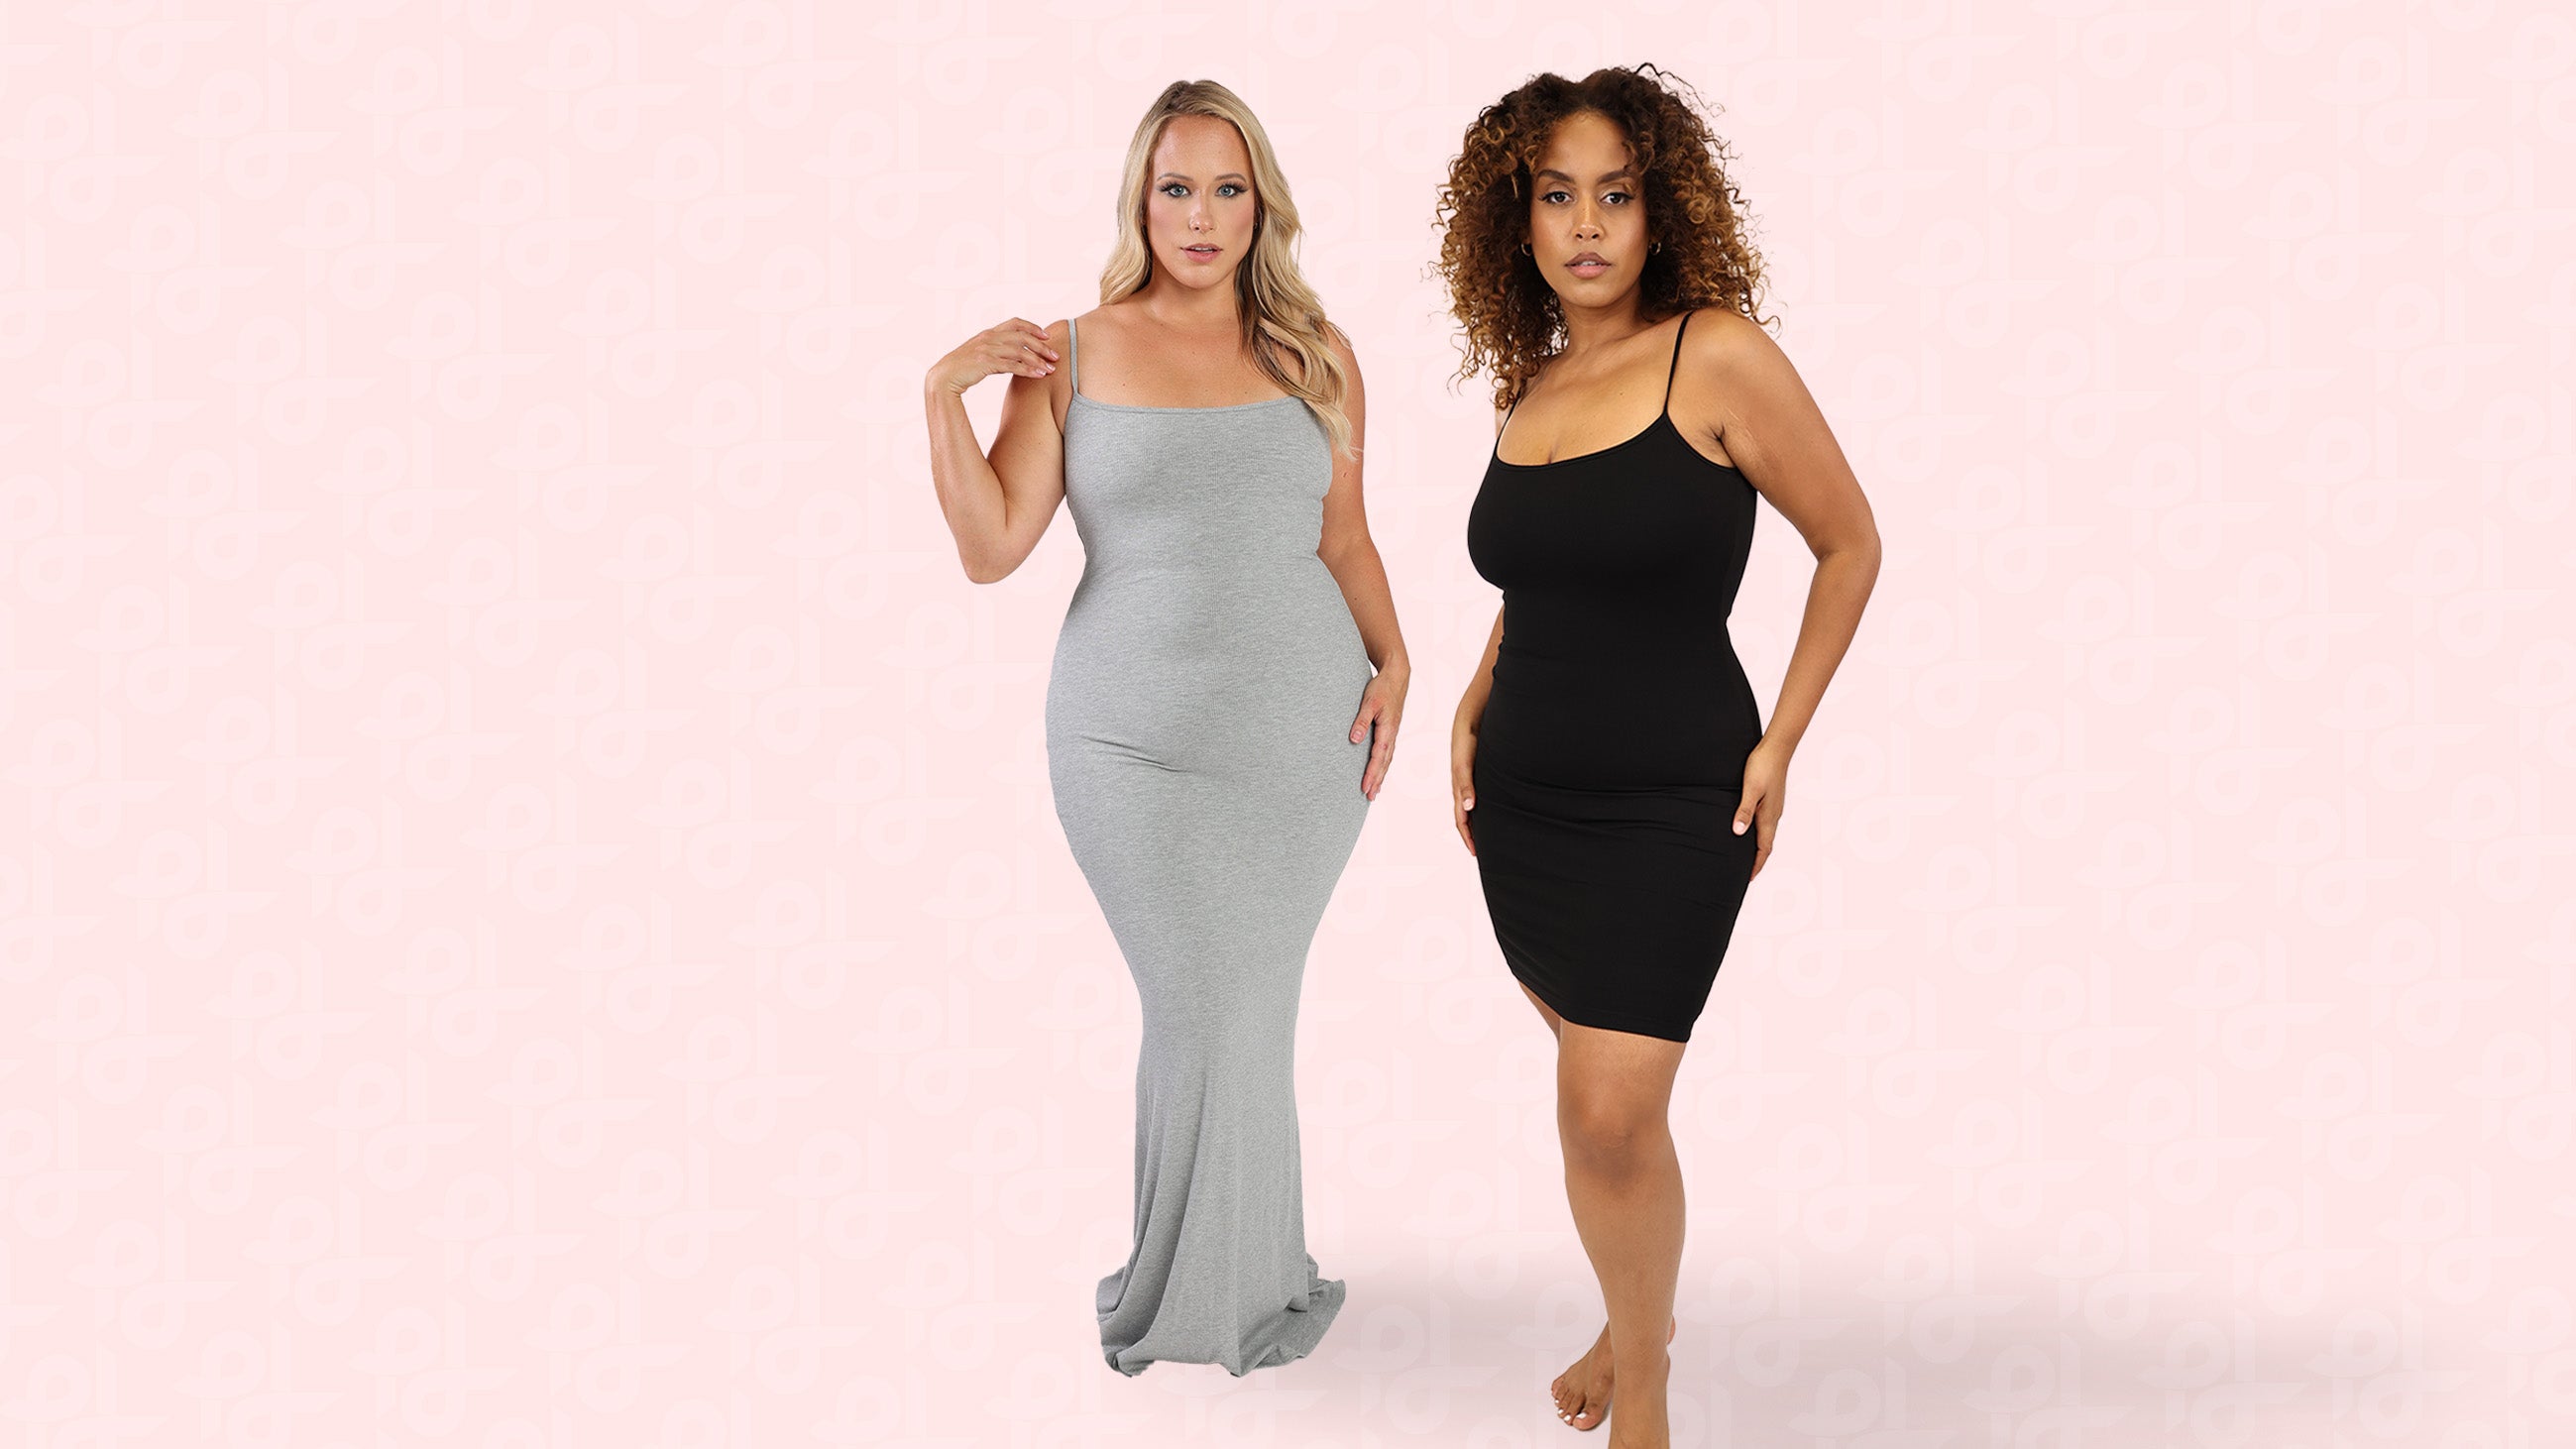 Introducing The Slimming, Shaping Slip Dress That Will Change Your Life!